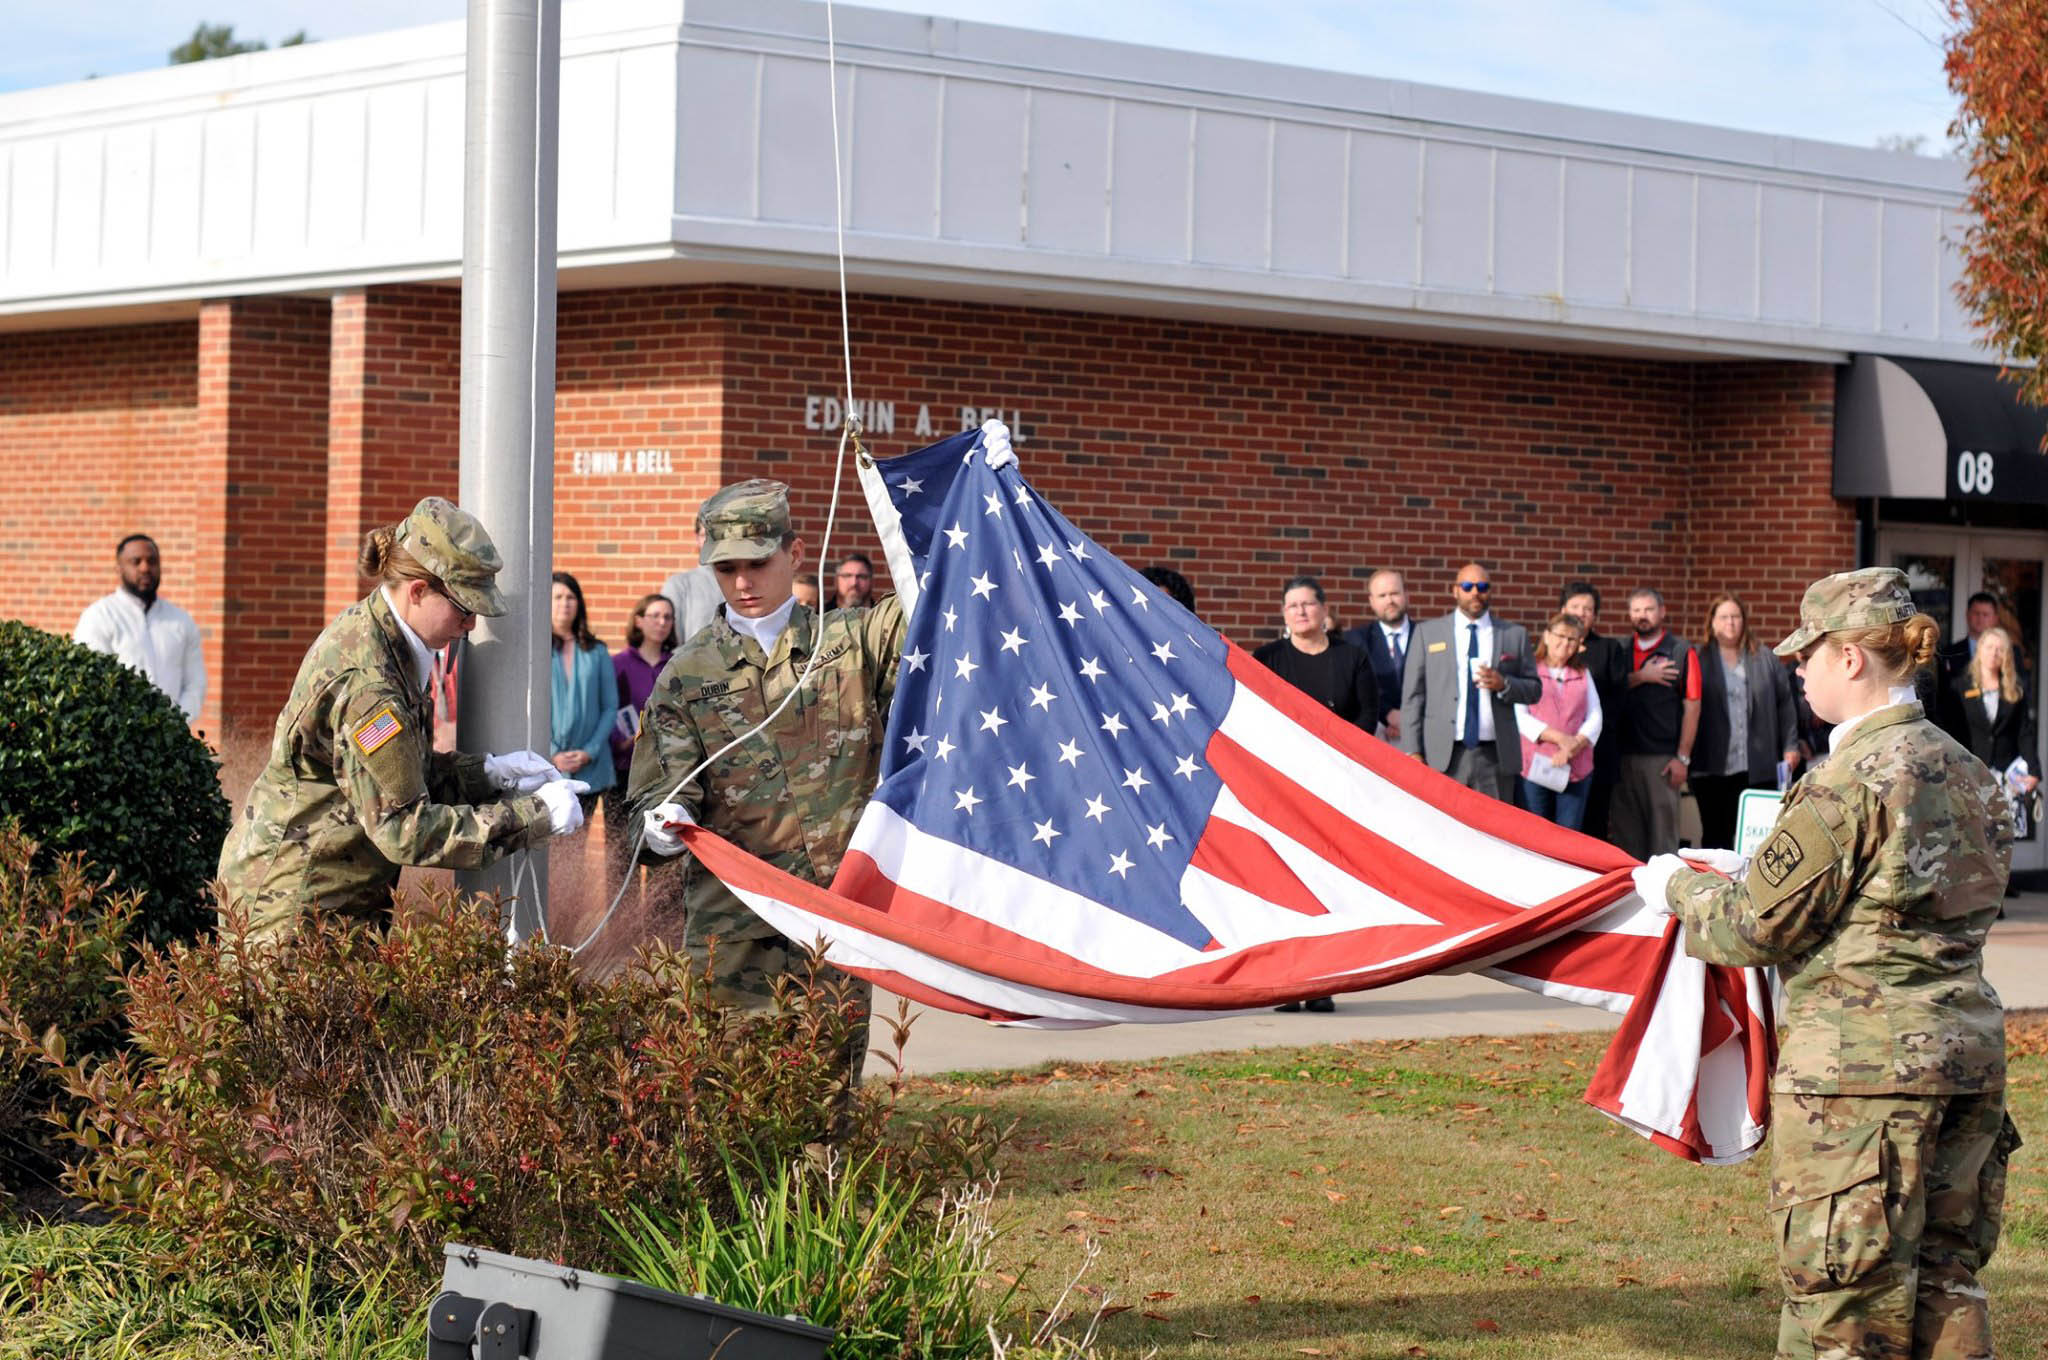 Click to enlarge,  The Campbell University ROTC displays the American flag during a Veterans Day Ceremony held Monday, Nov. 11, at the Central Carolina Community College Lee Main Campus in Sanford, N.C. 